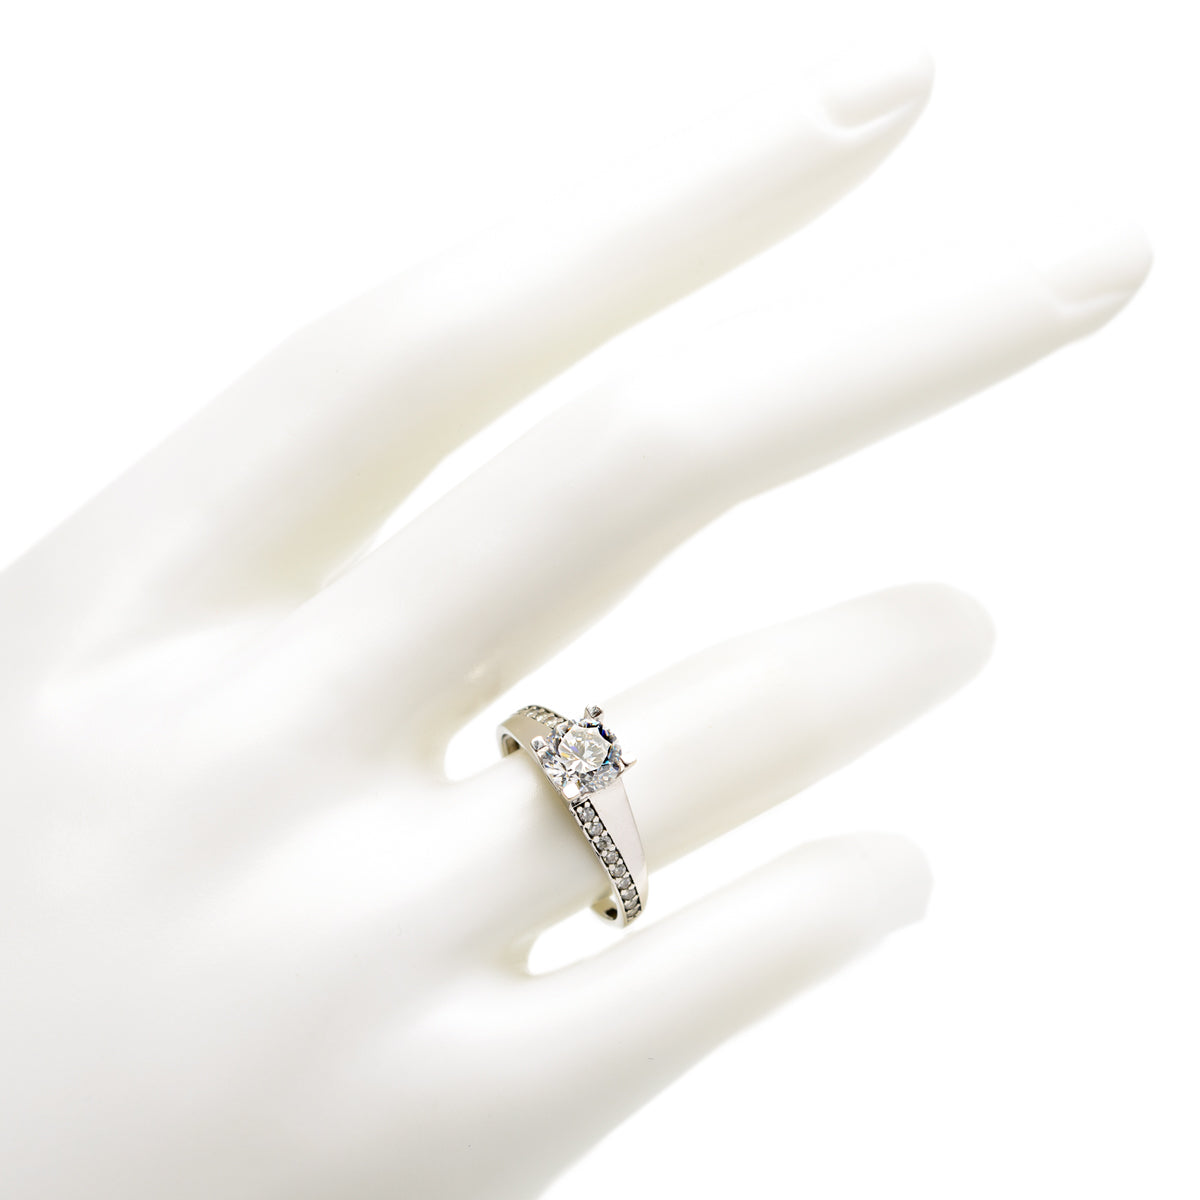 9ct White Gold Cubic Zirconia Solitaire With Accents Ladies Ring Size N1/2 (Code A826)